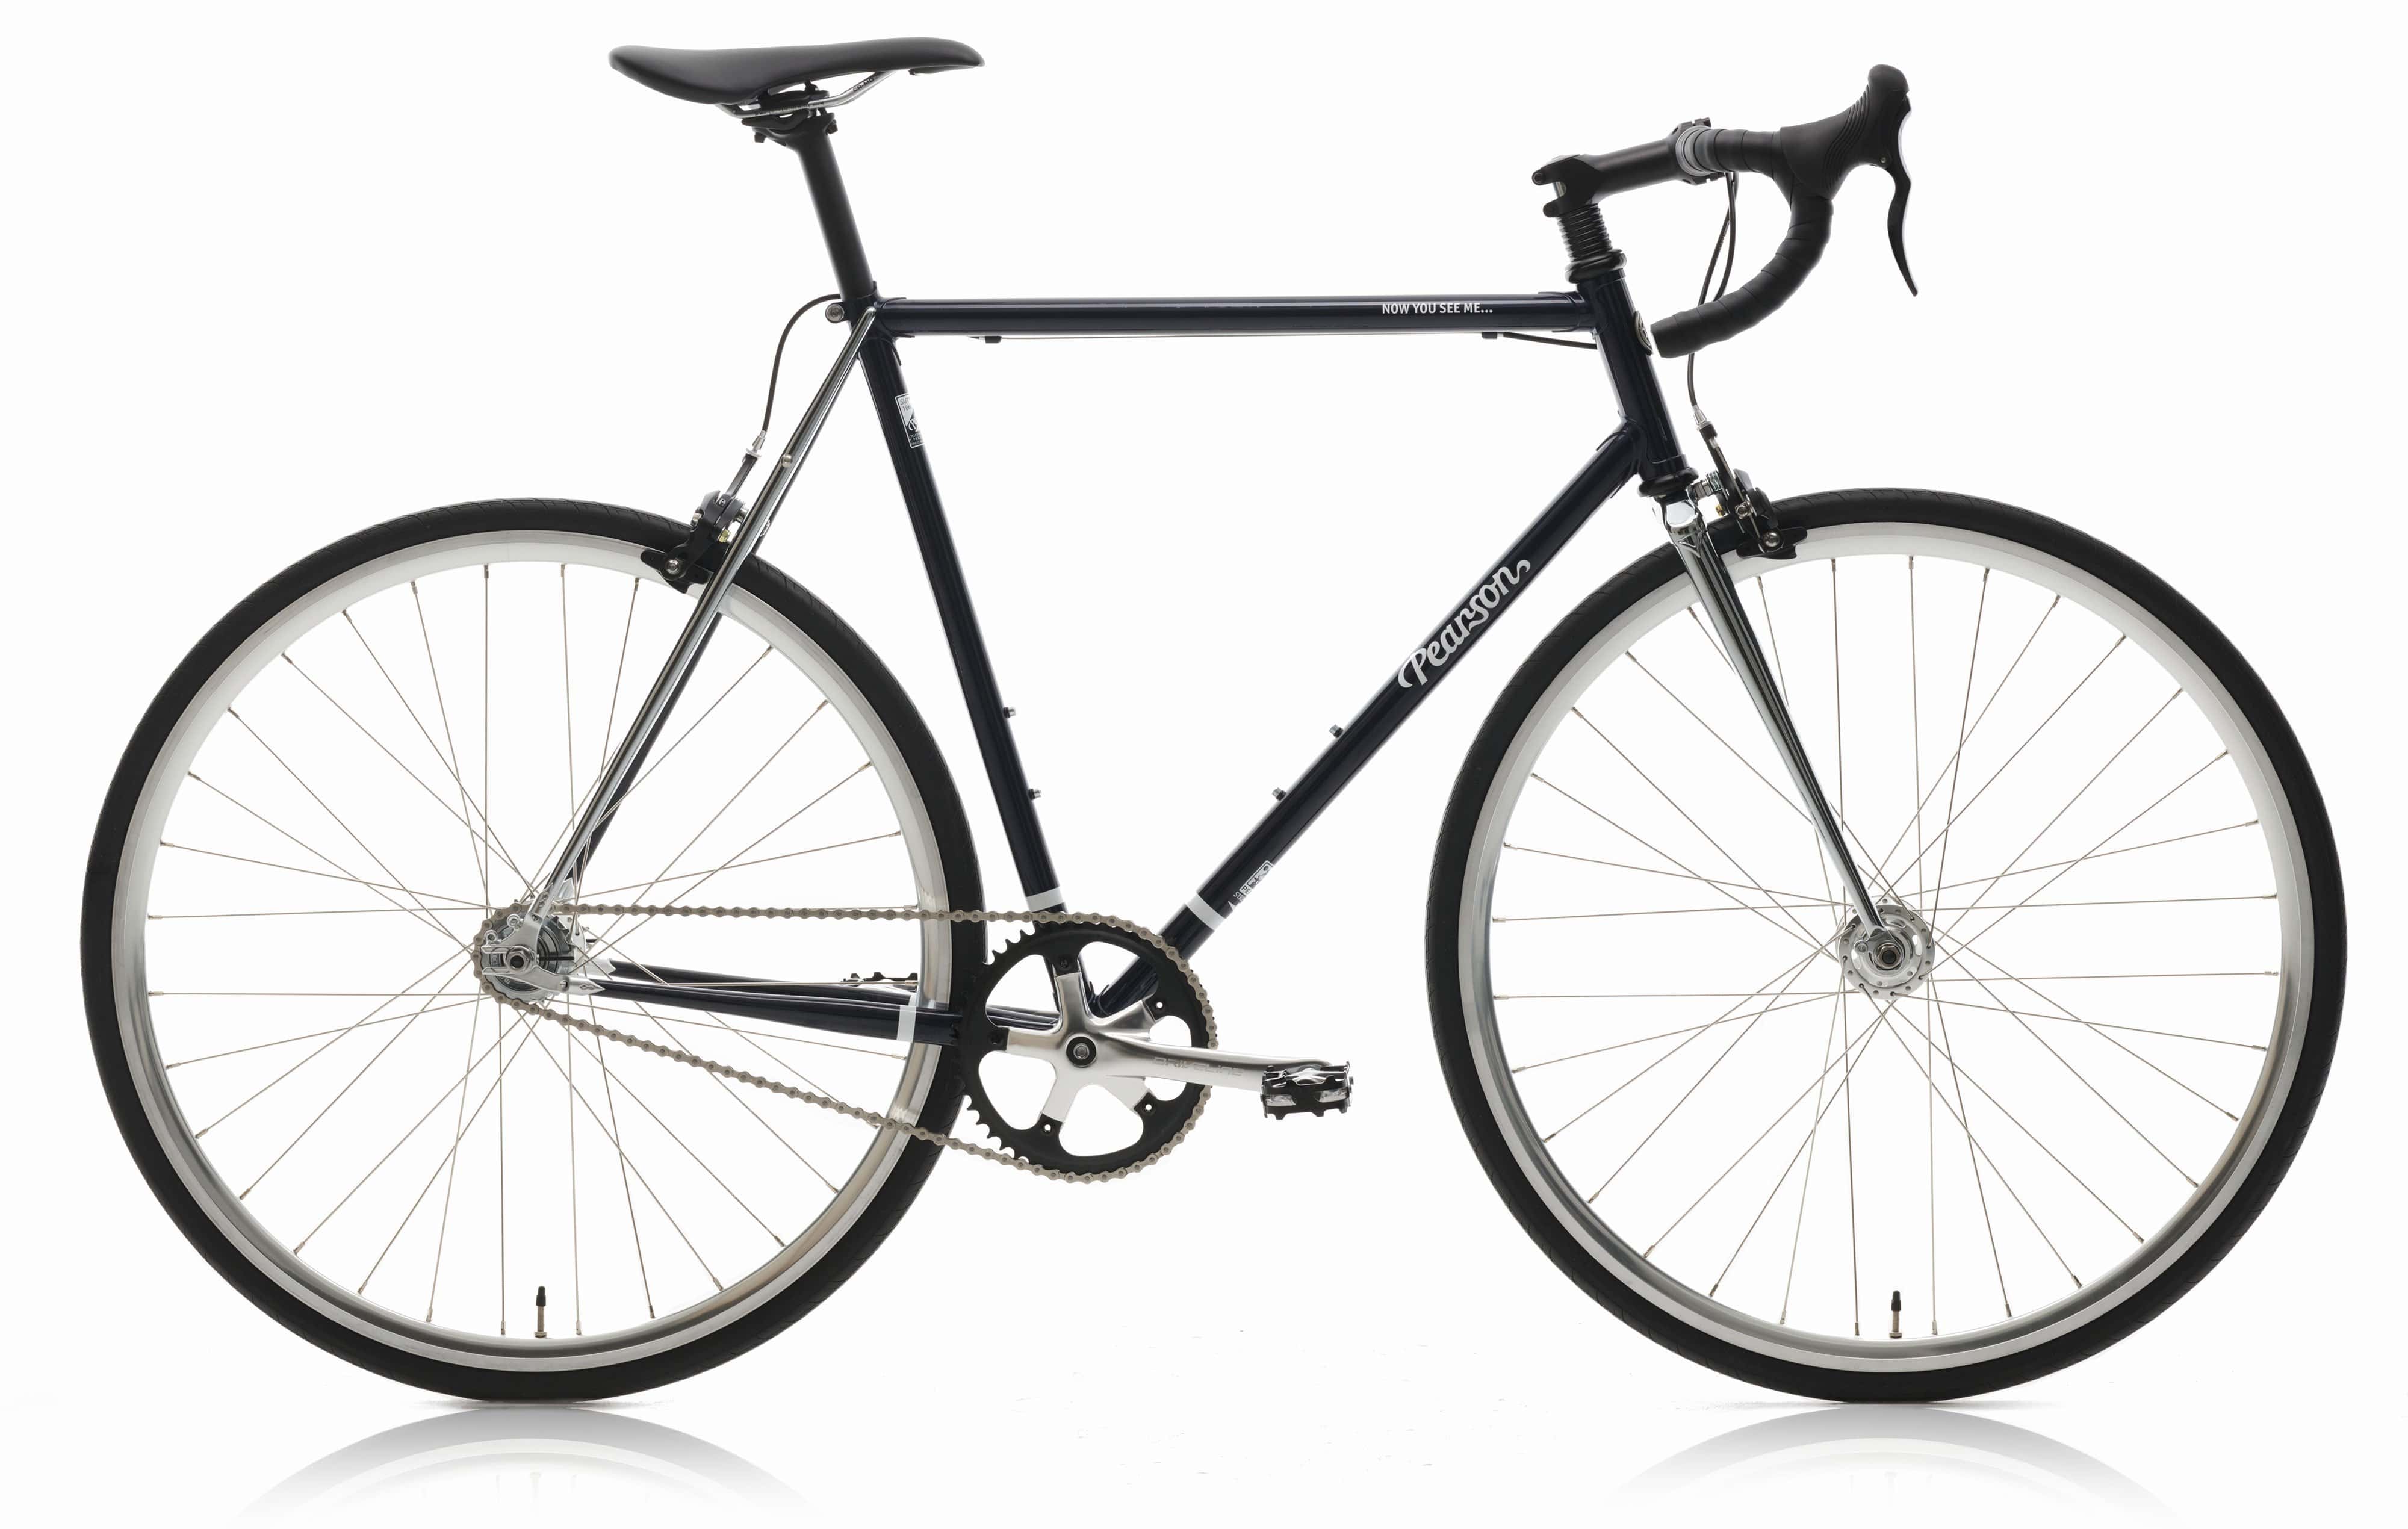 Pcs  Now You See Me - Steel Single Speed Bike  Continental Gator Hardshell 28mm / With Mudguards / Medium